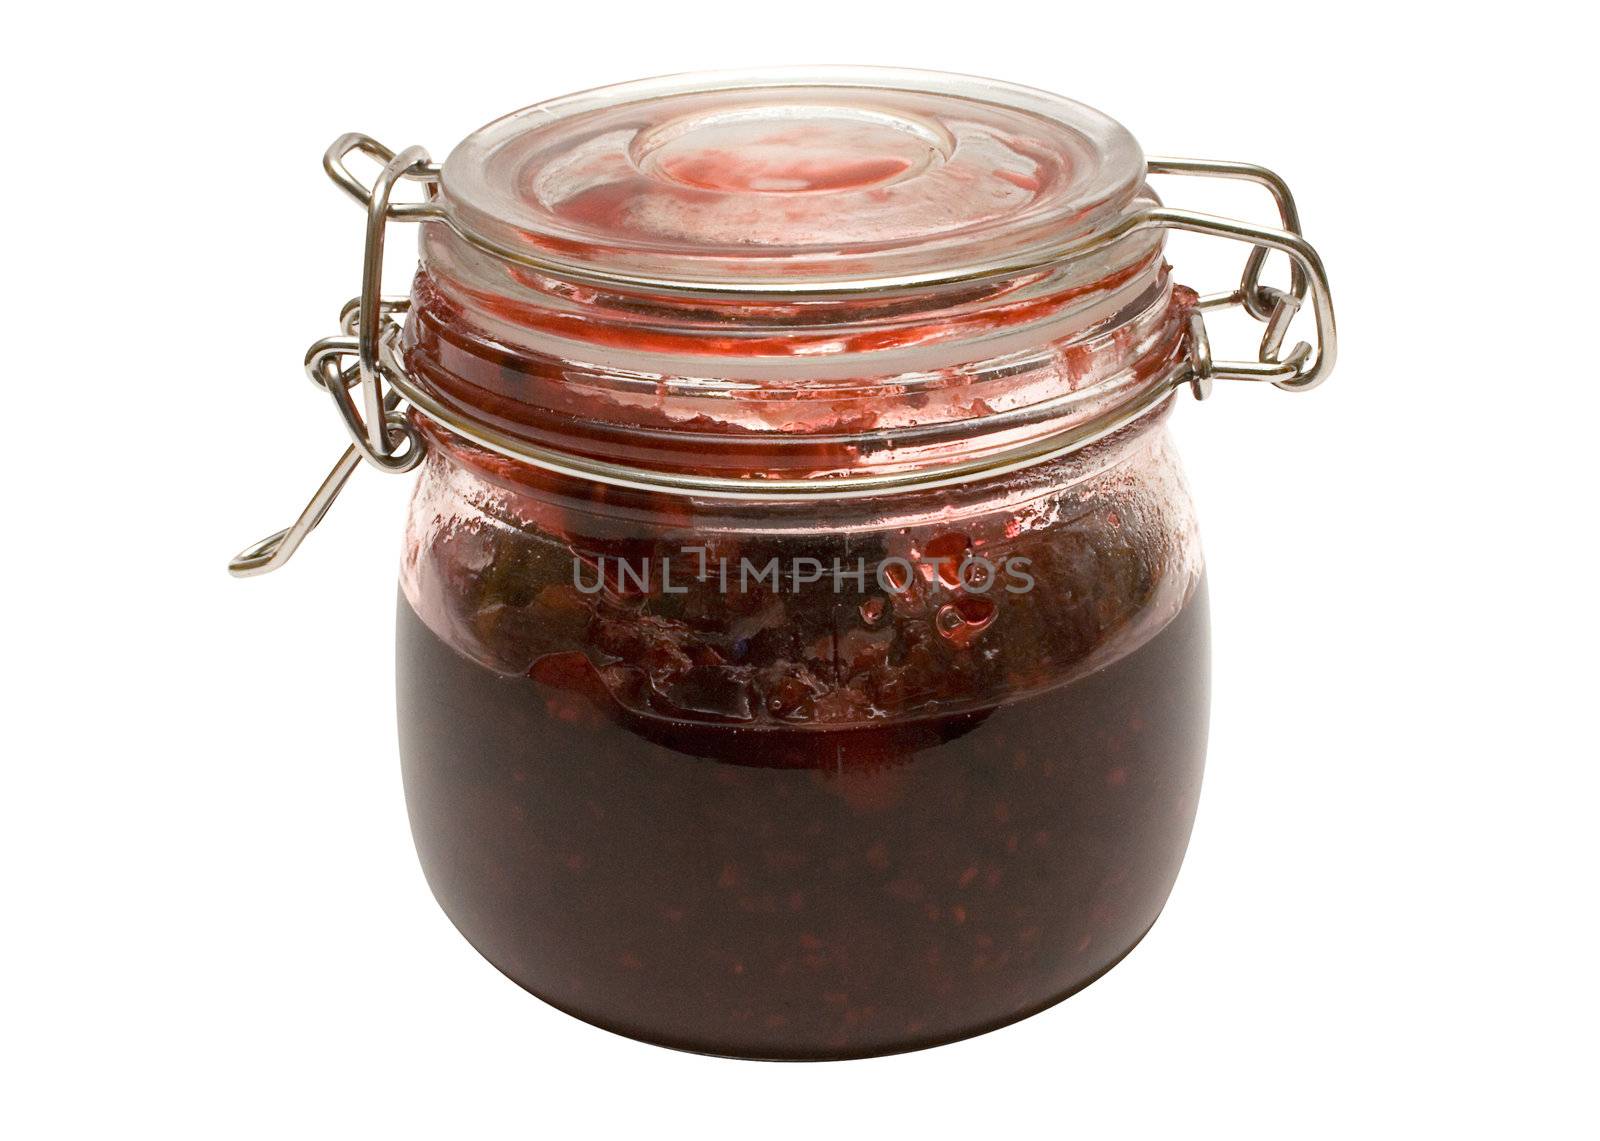 Strawberry Jam with Clipping Path by winterling